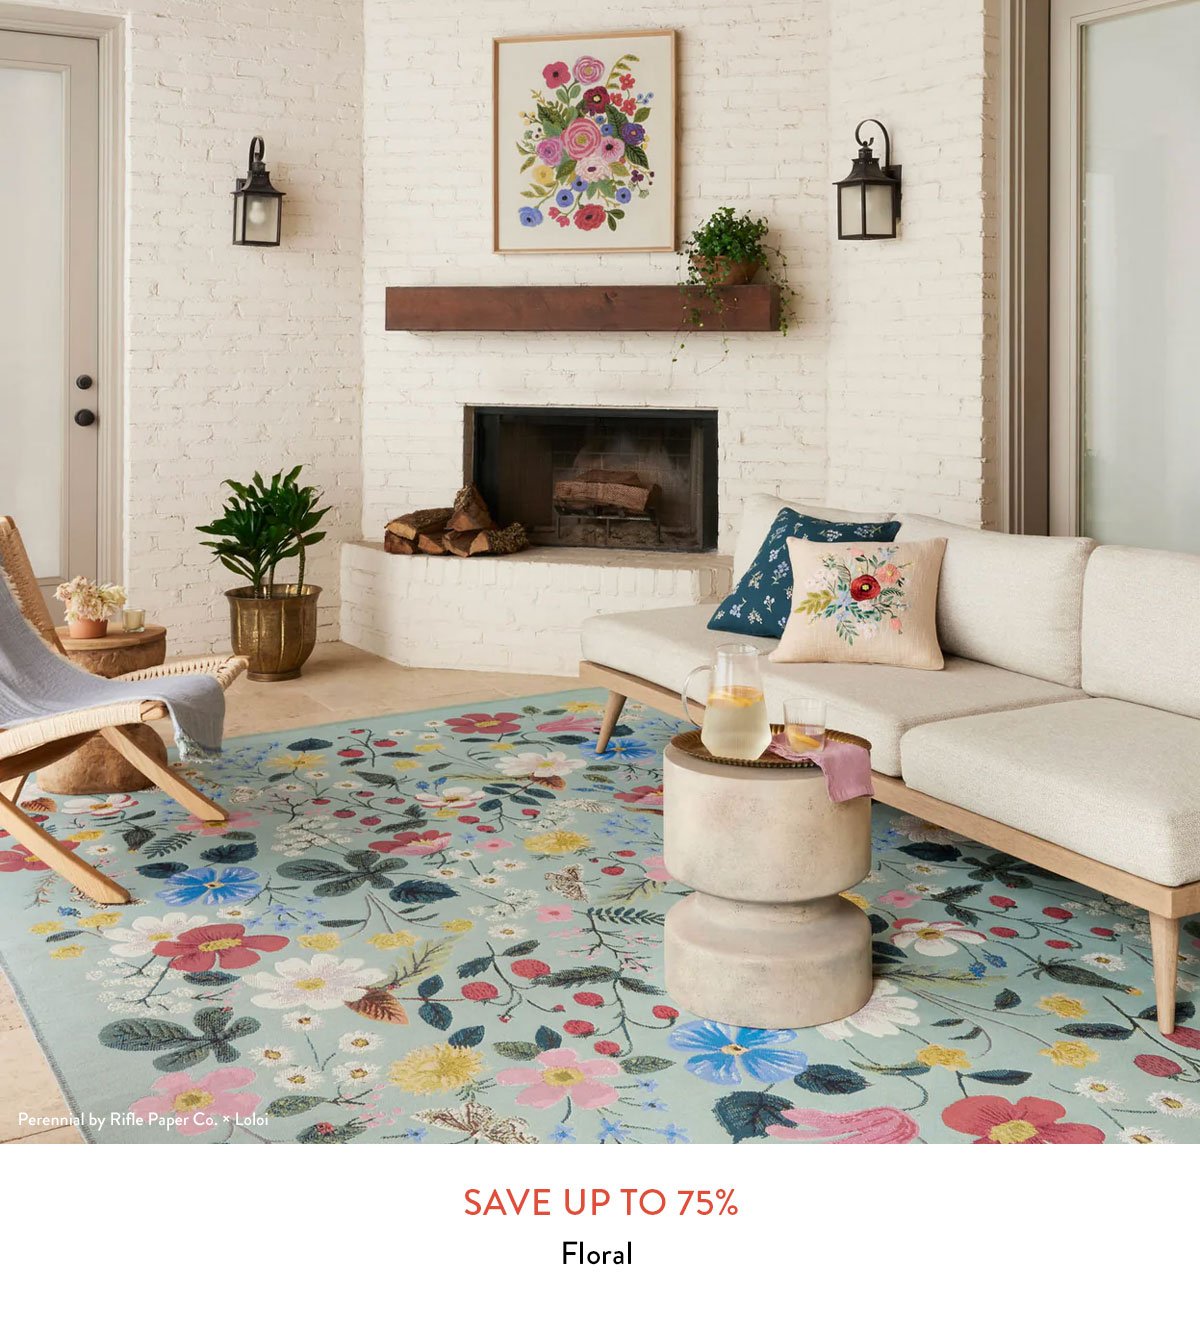 Floral - Save up to 75%